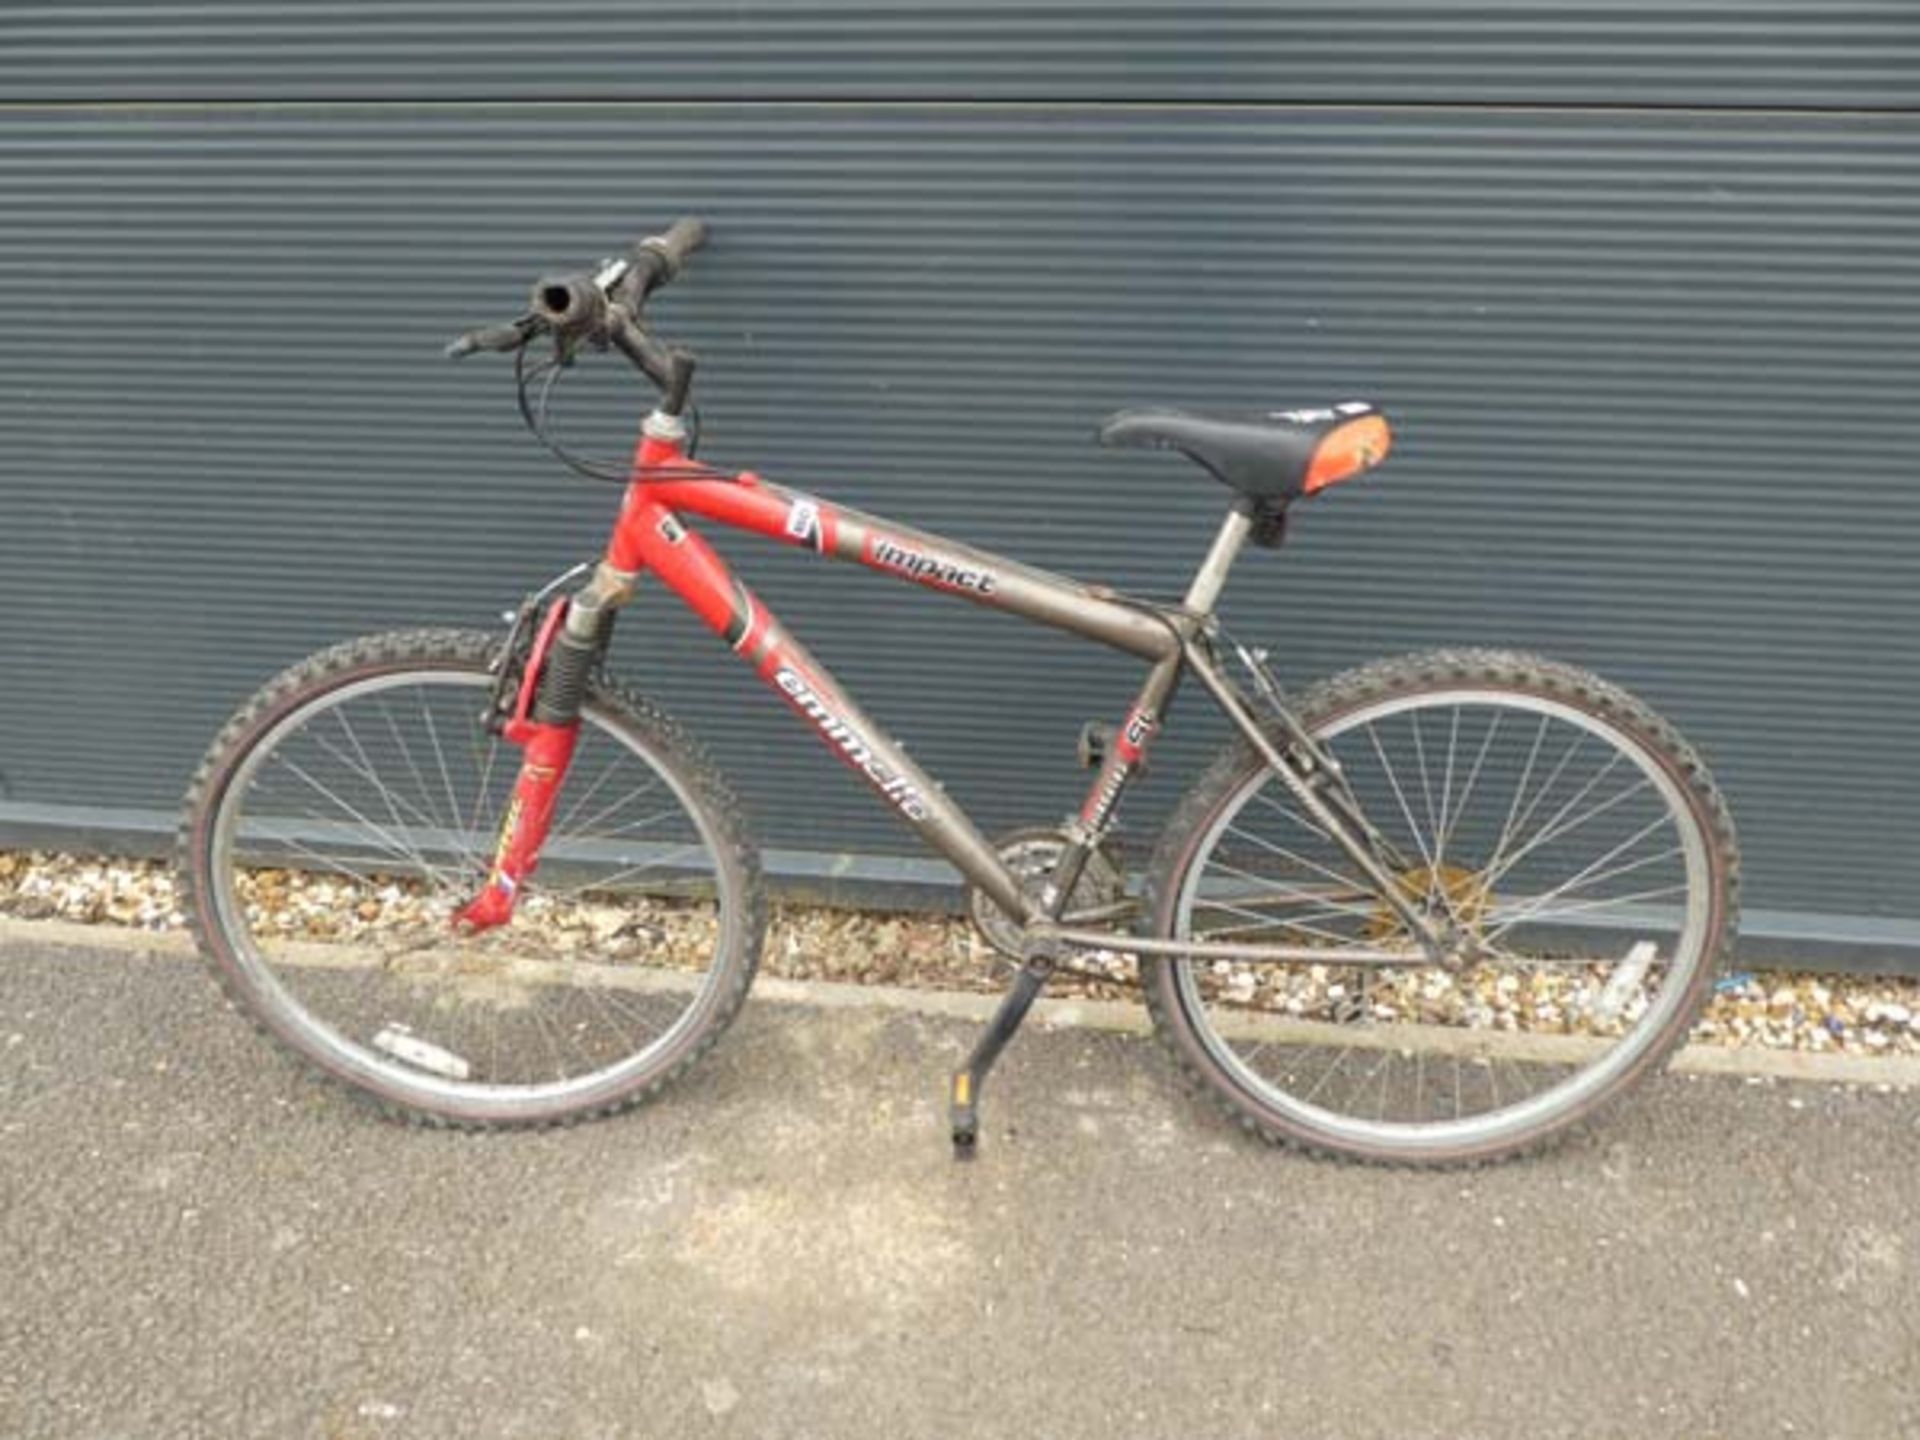 An Emmelle Impact grey/red gents mountain bike